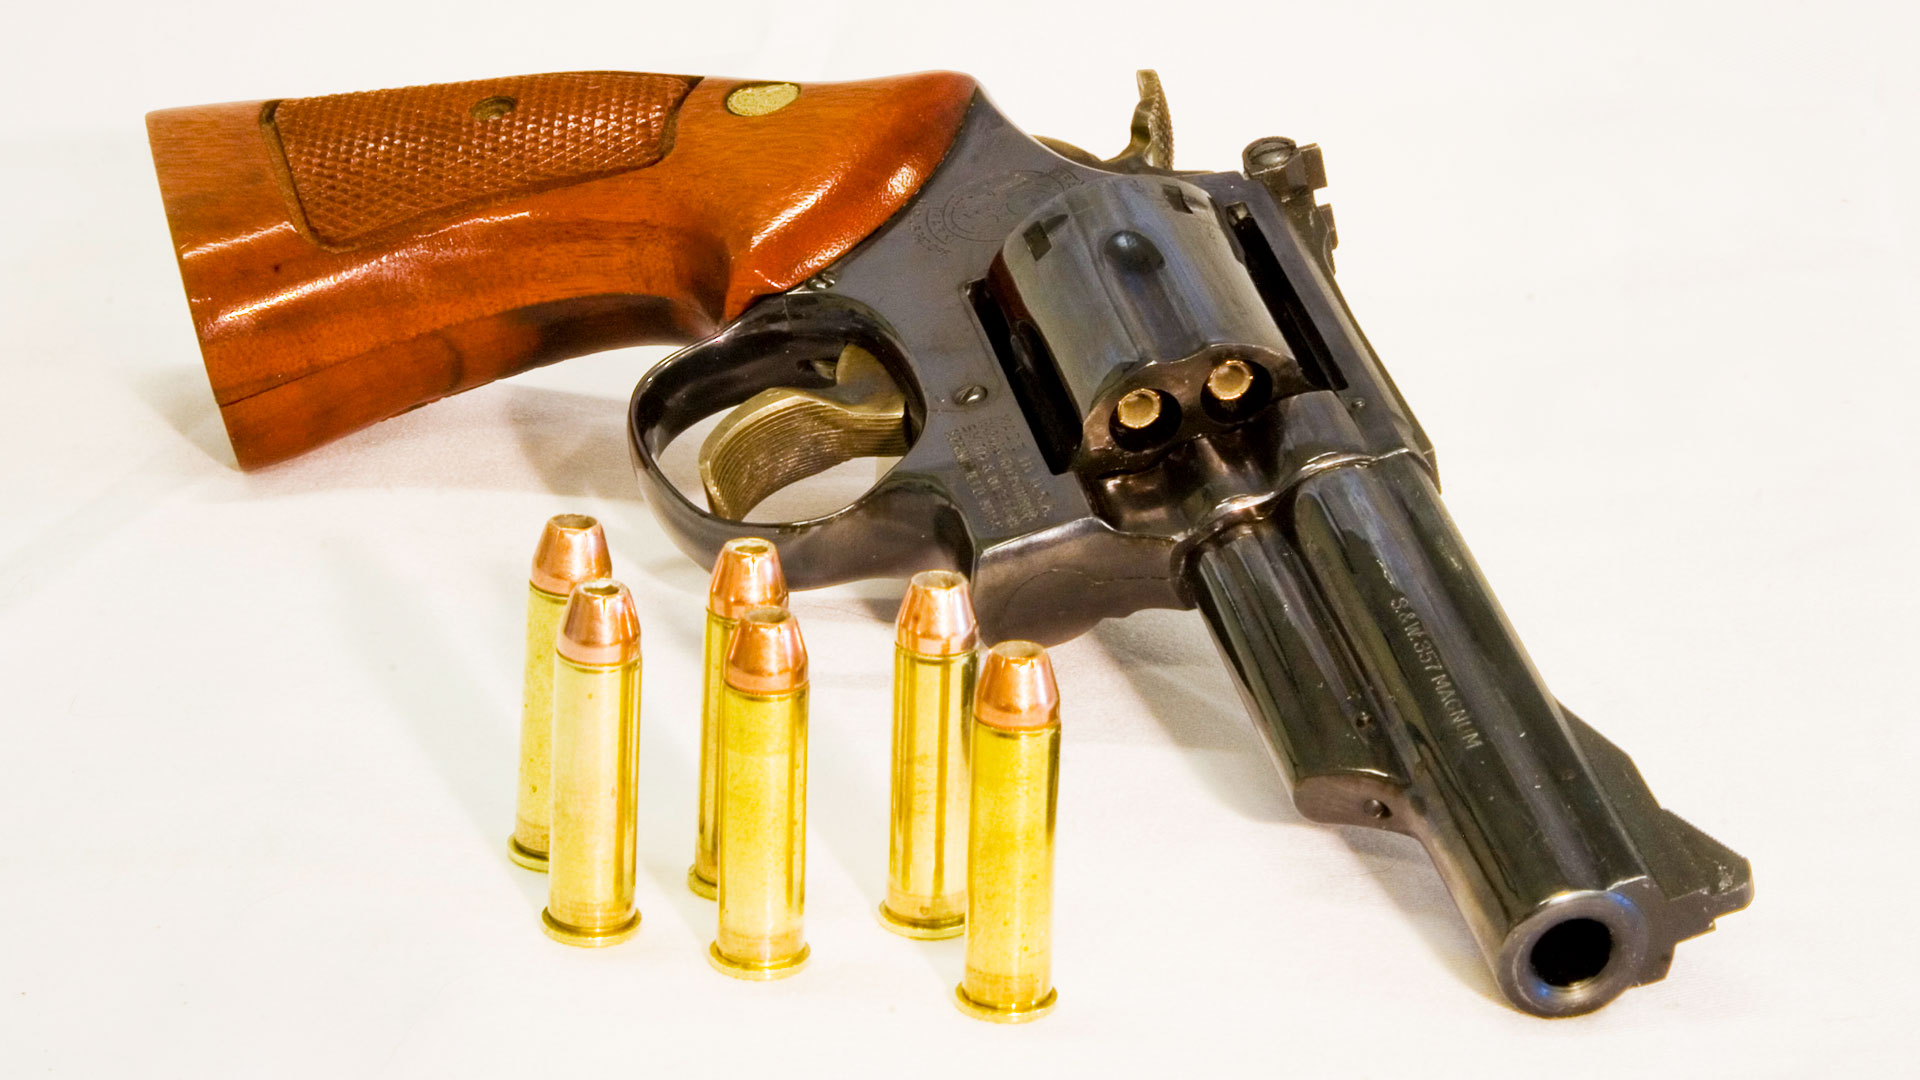 The .357 Magnum: History & Performance